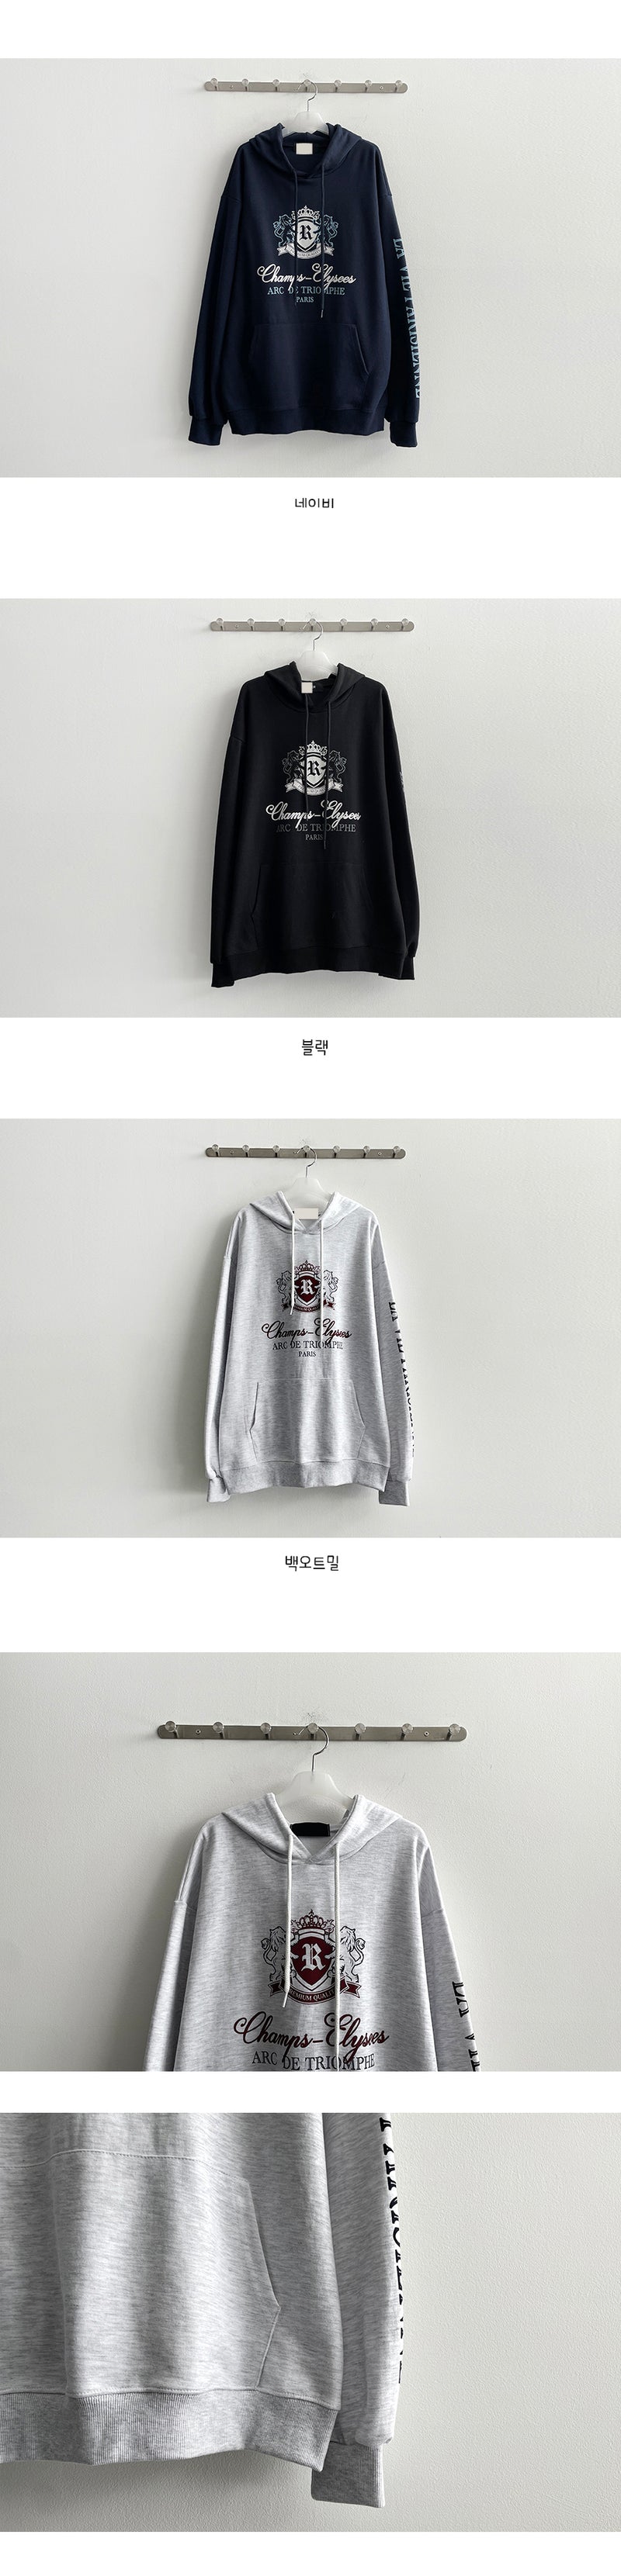 Royal Knife Oversized Fit Hoodie